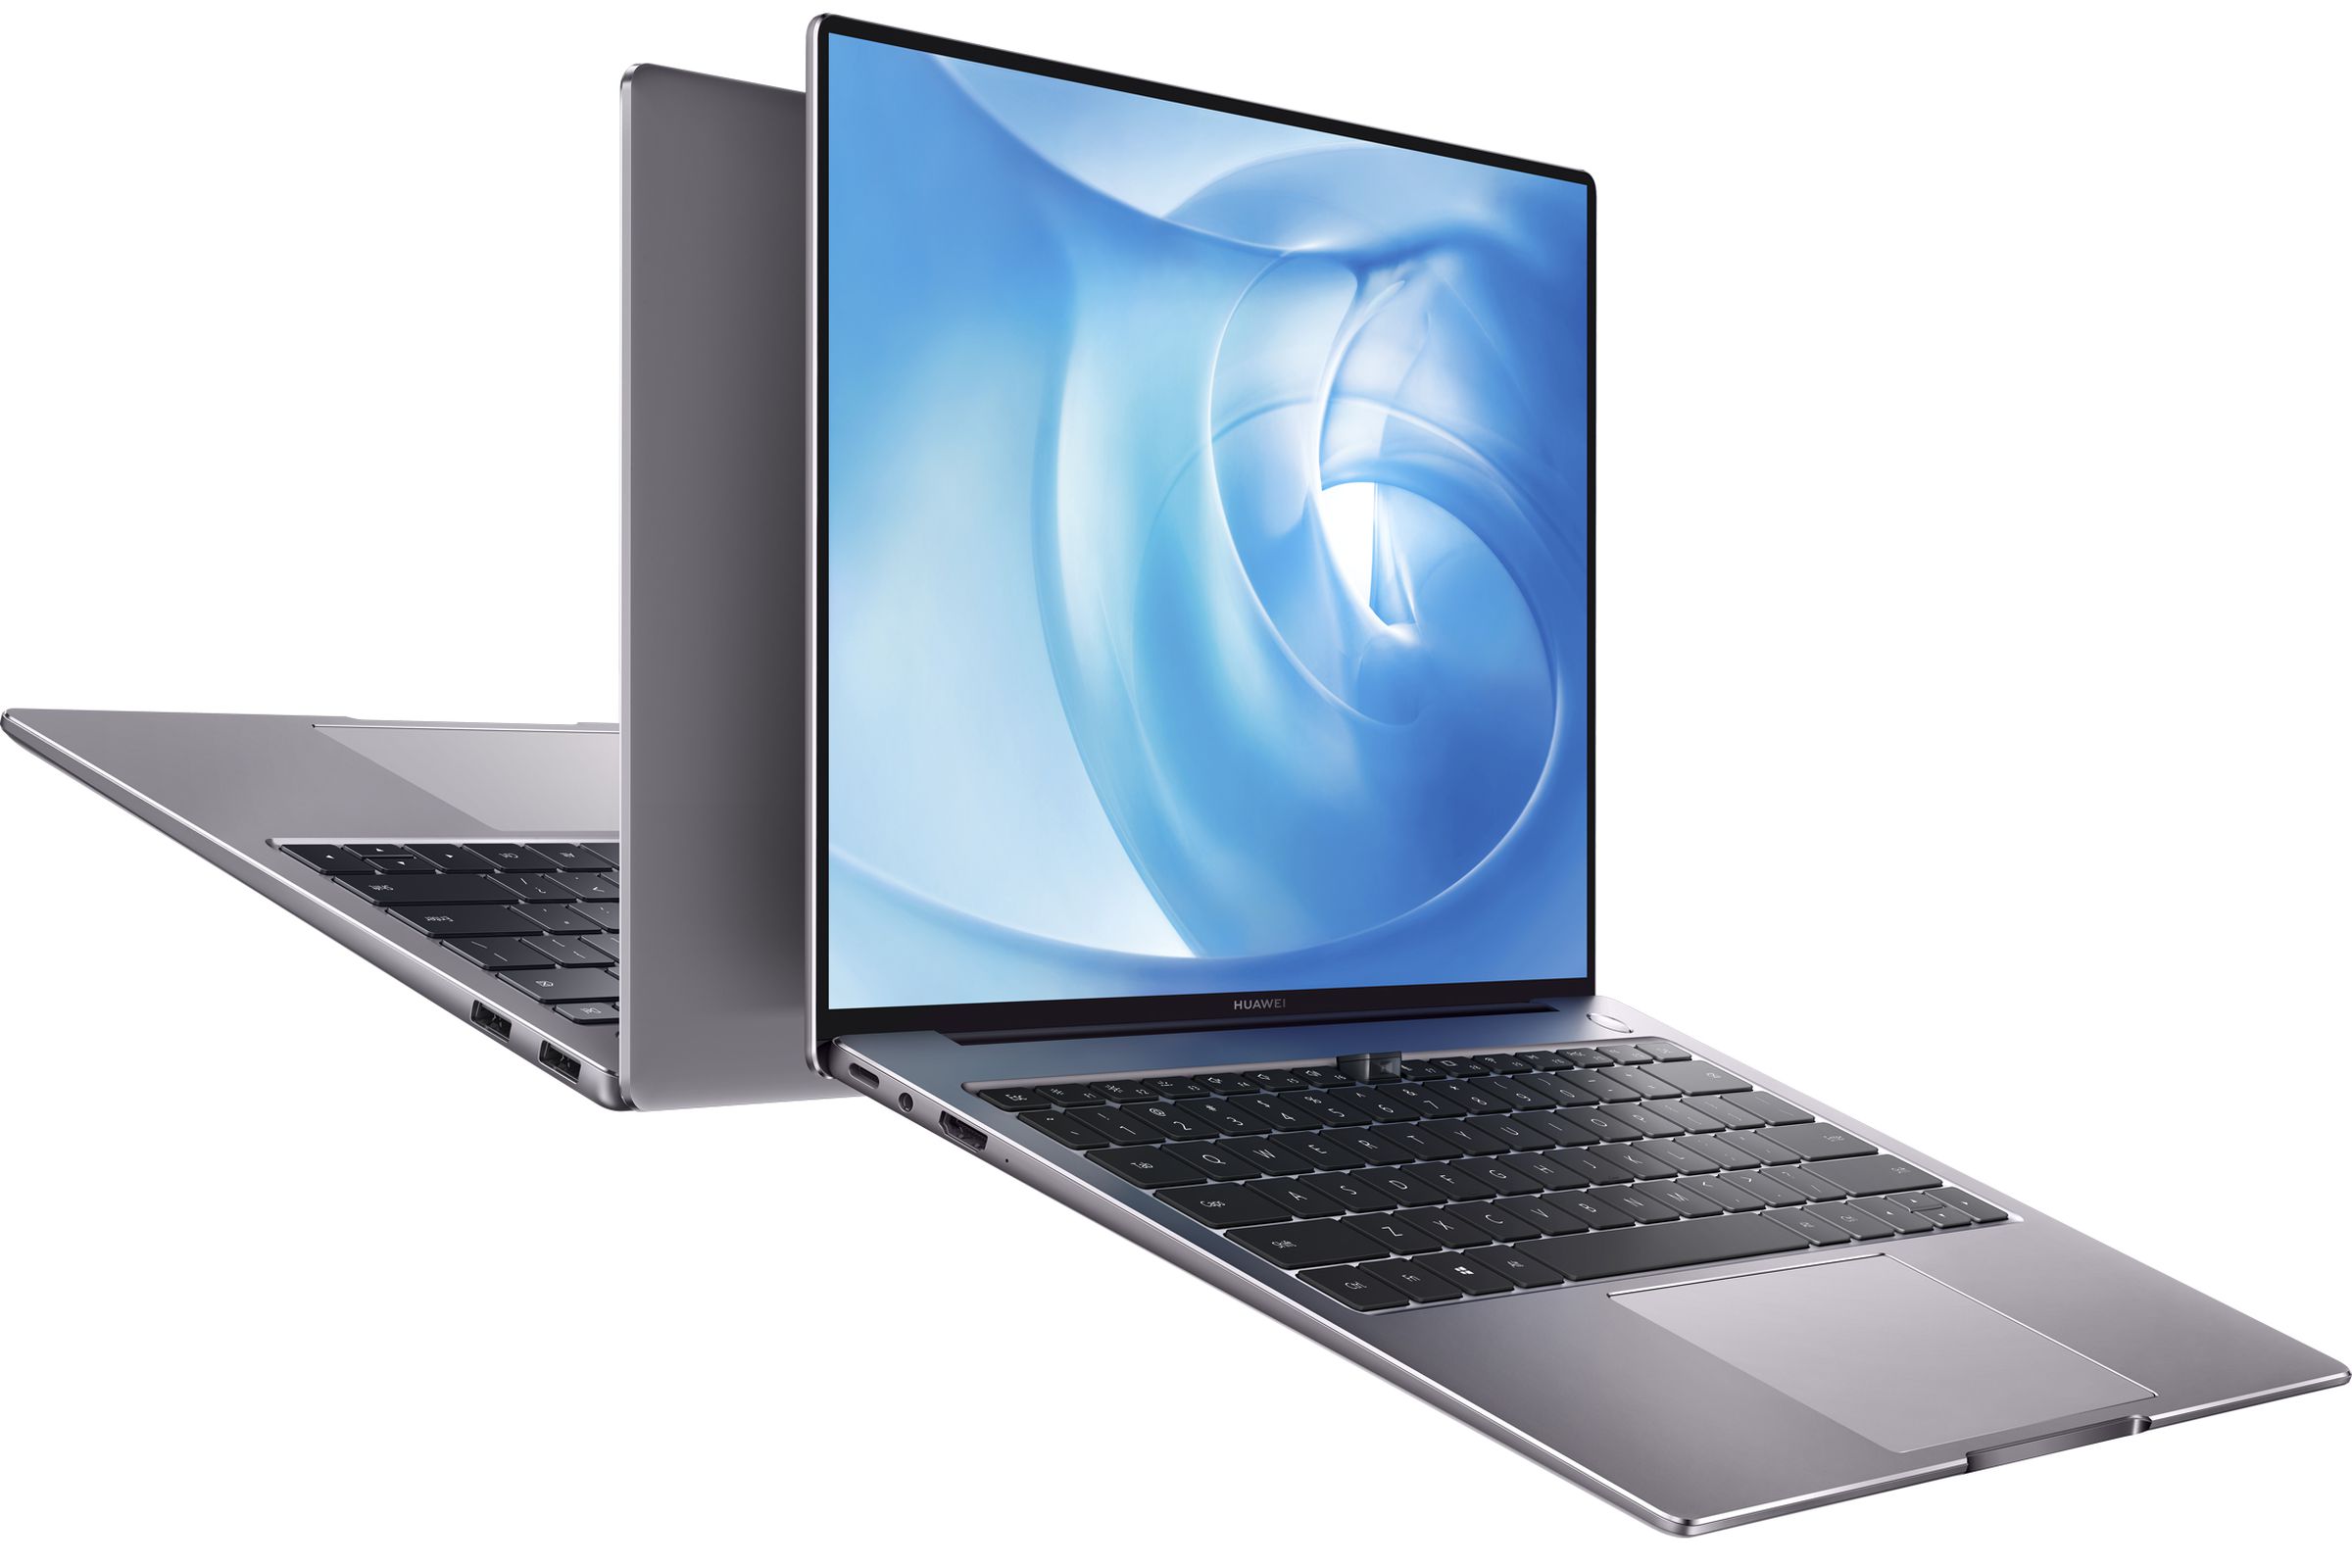 Huawei’s new MateBook 14 now comes with up to an AMD Ryzen 4800H.